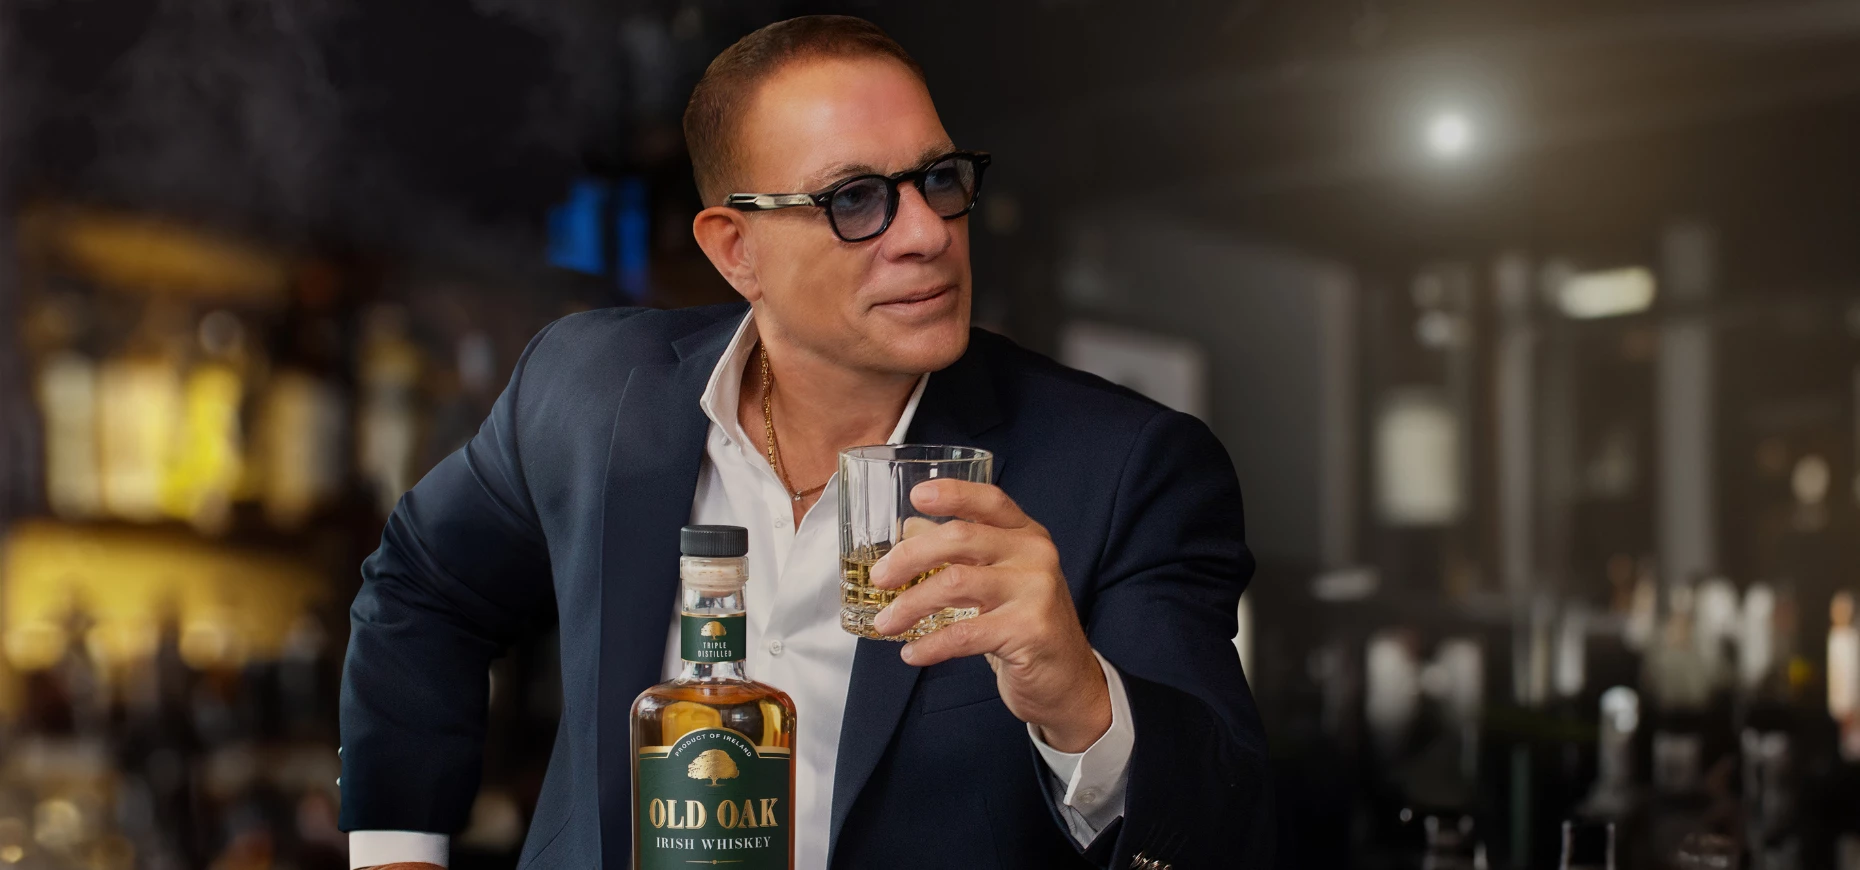 Jean-Claude Van Damme sat with a glass of his new Irish Whiskey, Old Oak.